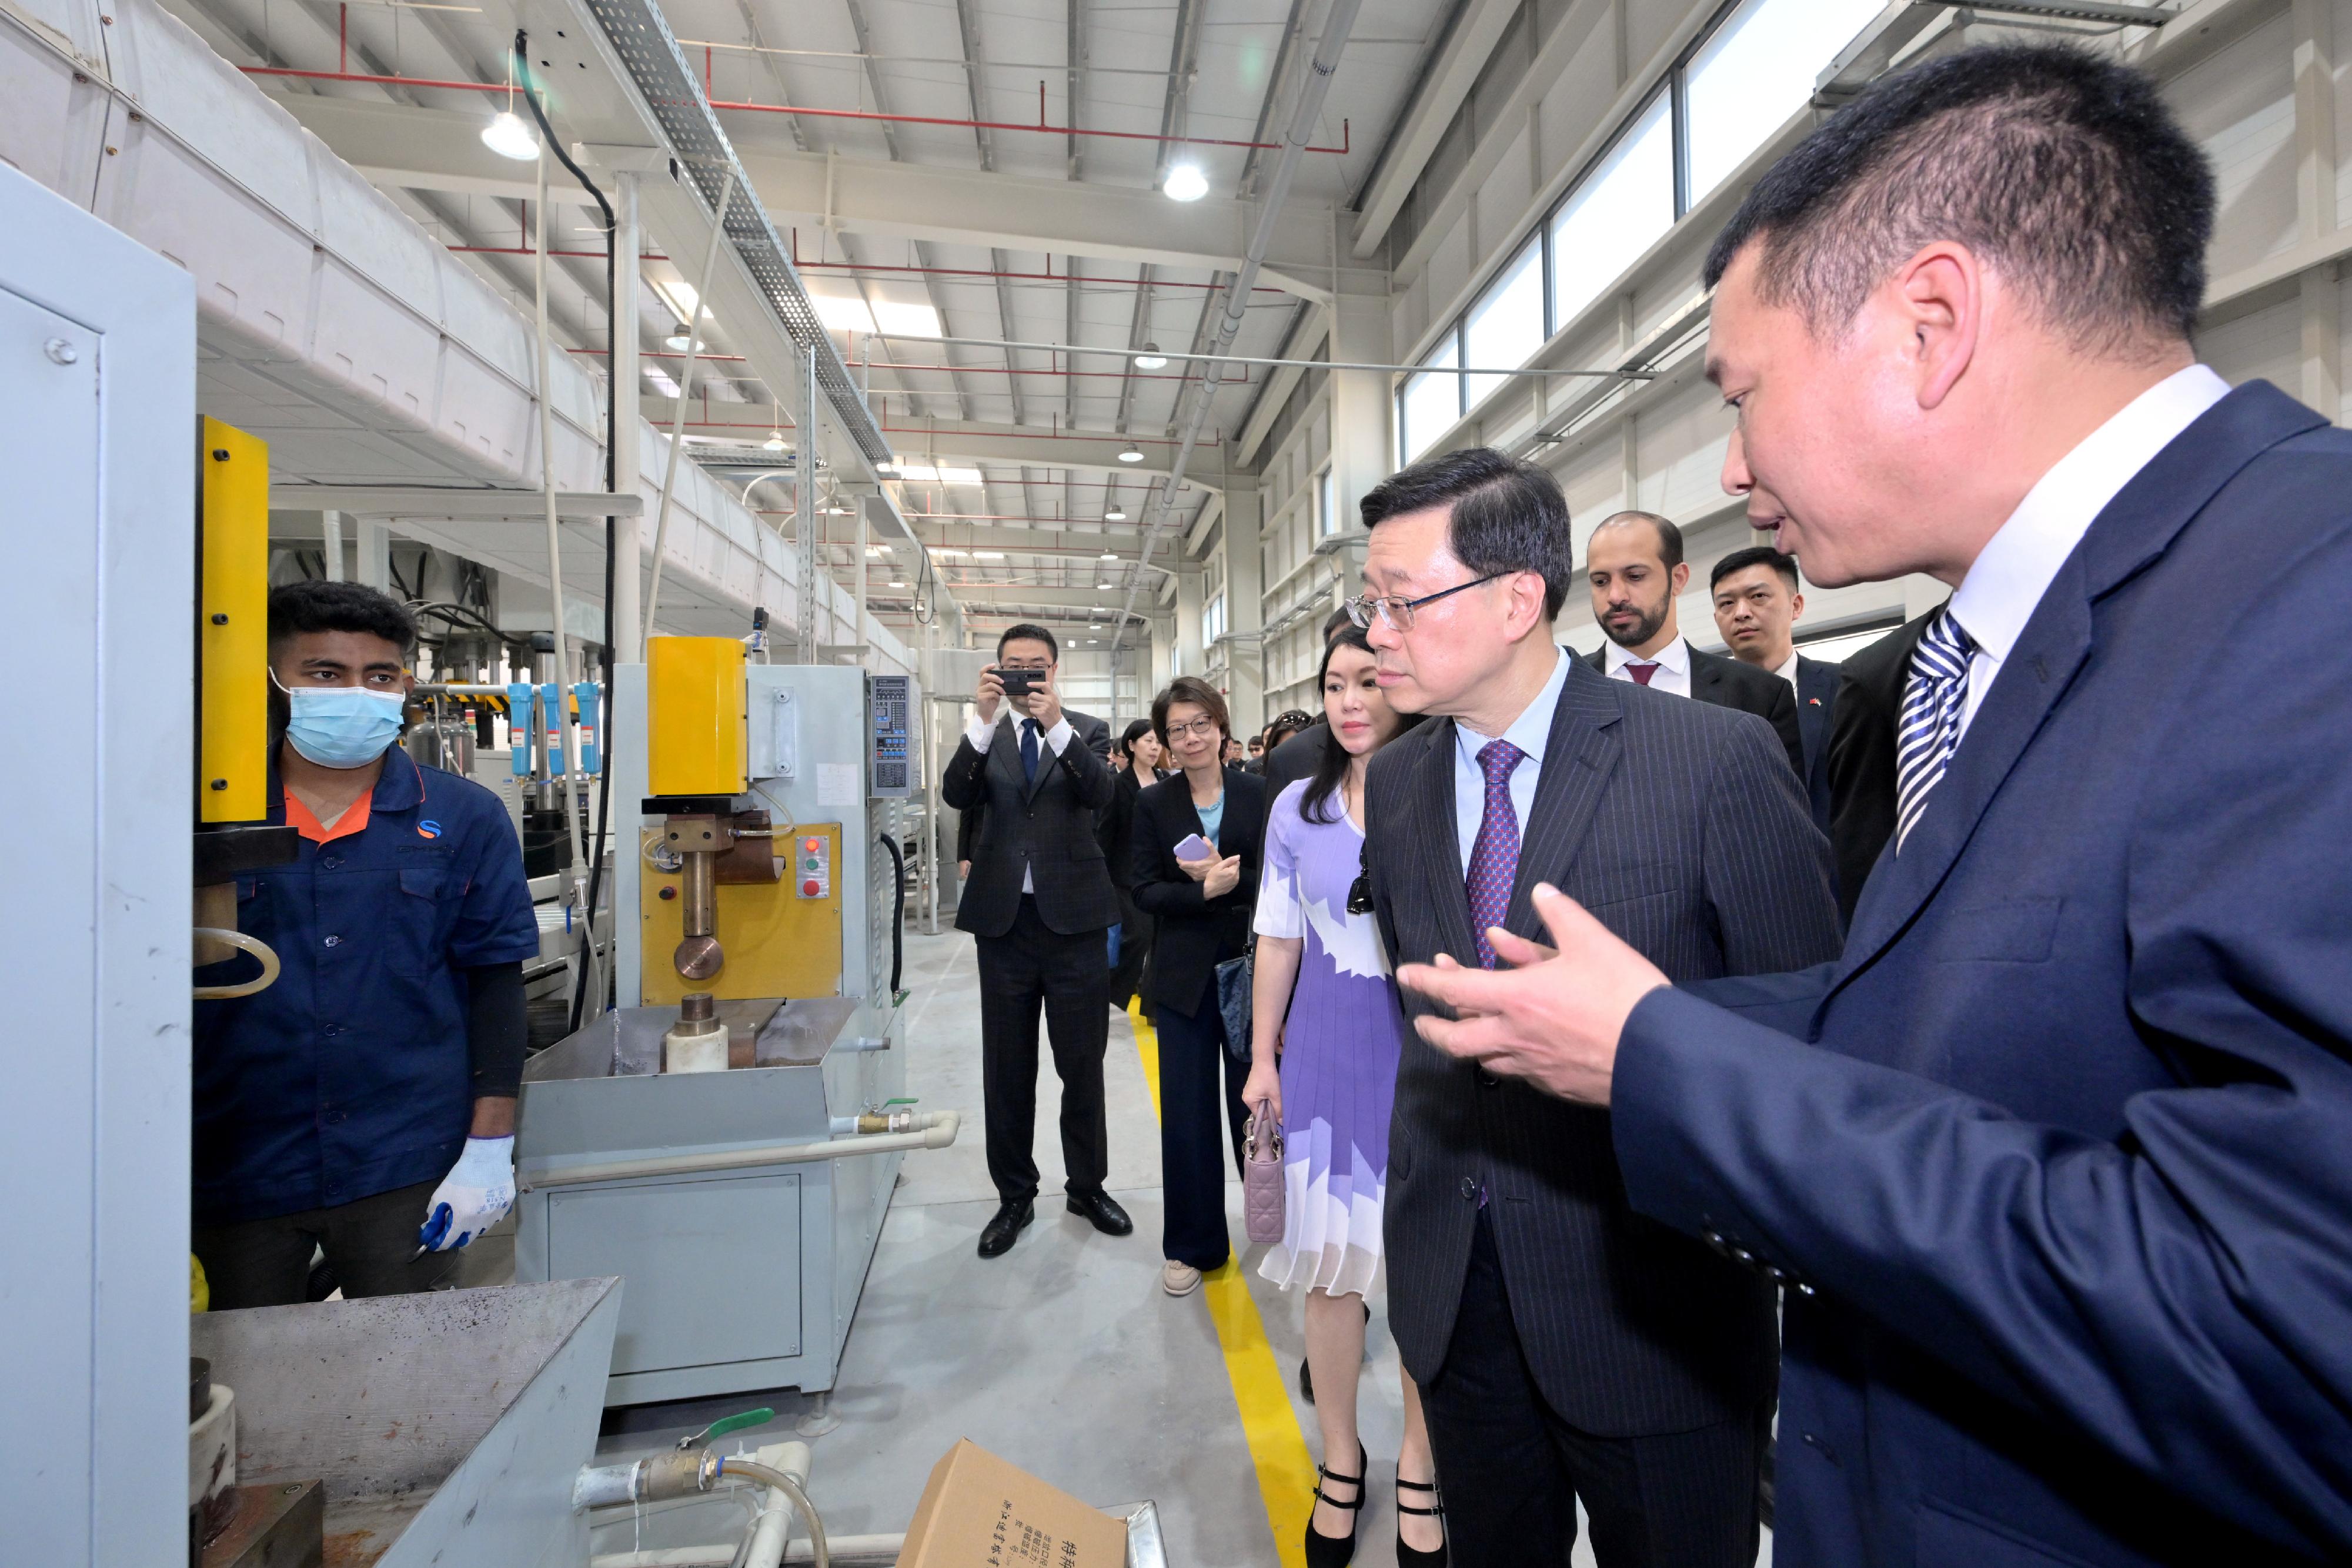 The Chief Executive, Mr John Lee, toured the China-UAE Industrial Capacity Cooperation Demonstration Zone at the Khalifa Industrial Zone in Abu Dhabi, the United Arab Emirates, today (February 8, Abu Dhabi time). Photo shows Mr Lee (second right) touring the zone.